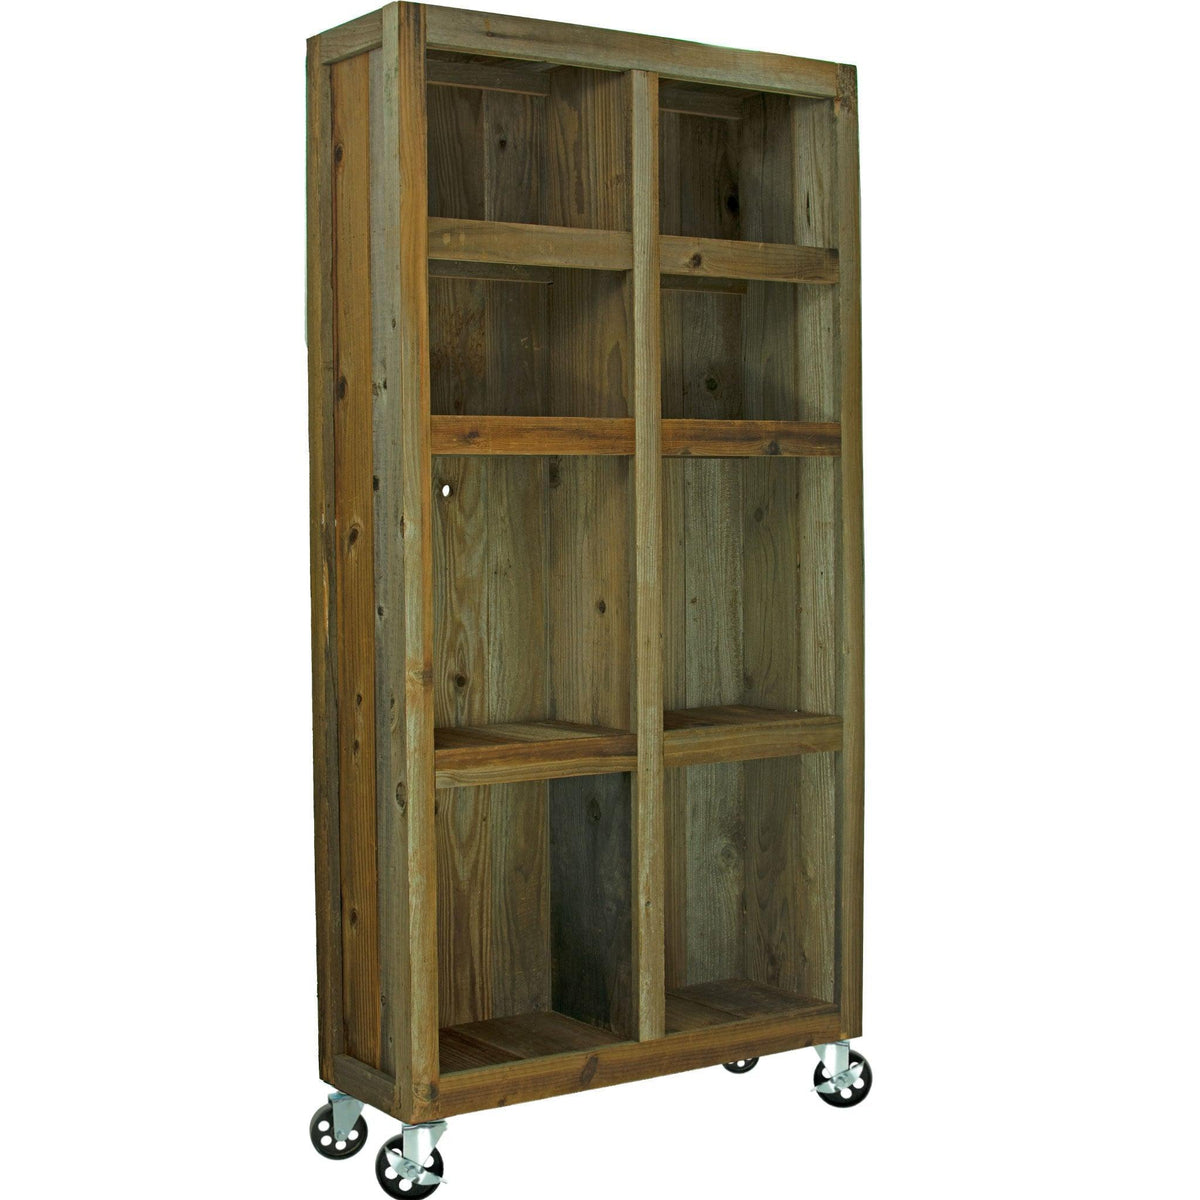 Introducing Lee Display's brand new Outdoor Rolling Redwood Storage Cabinet with Wheels. Shelving Unit with 5in Galvanized Steel Casters on sale at leedisplay.com